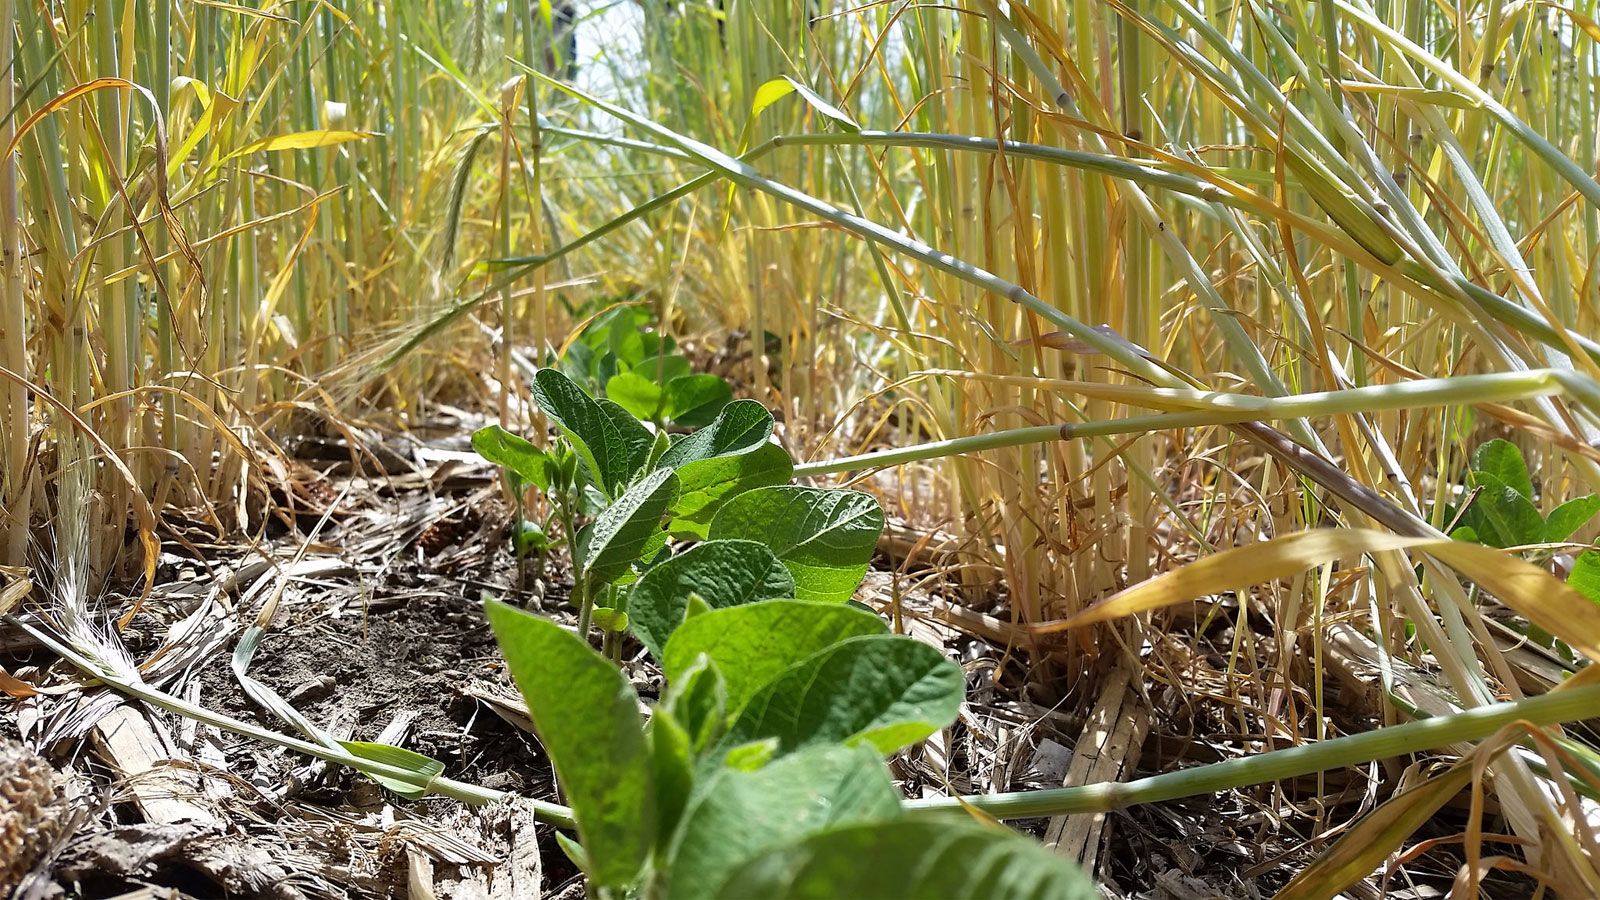 Soybeans coming up in a rye cover crop